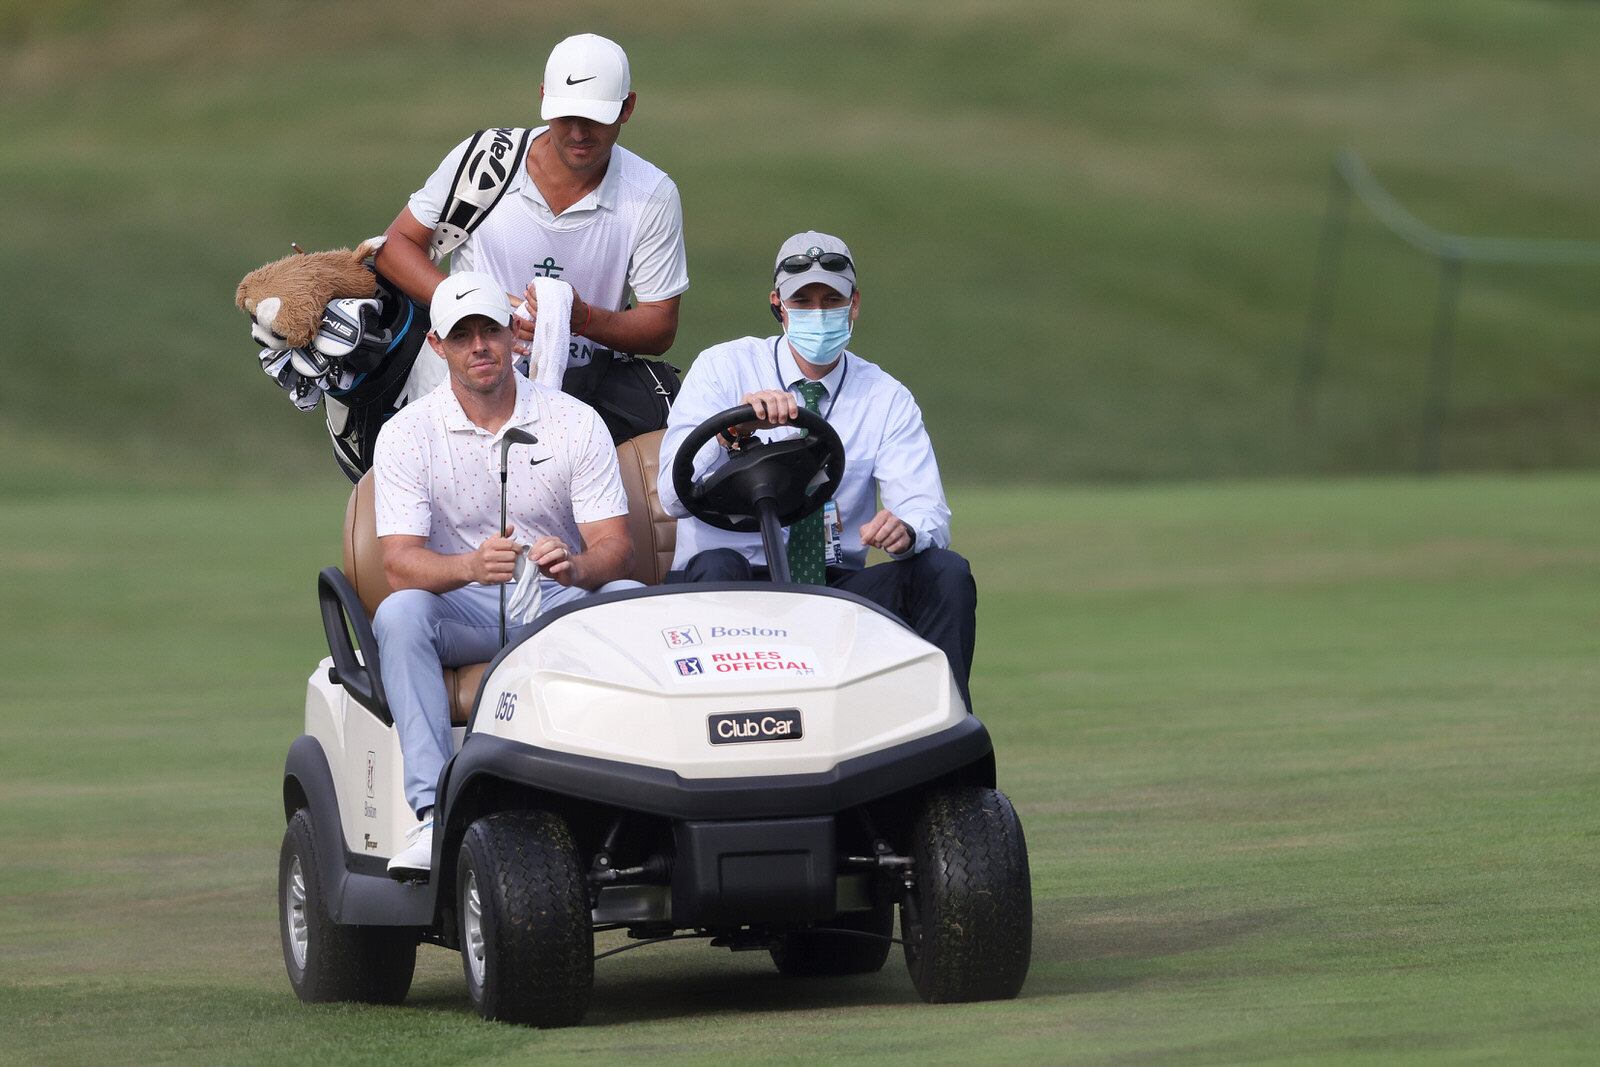  NORTON, MASSACHUSETTS - AUGUST 22: Rory McIlroy of Northern Ireland and caddie Harry Diamond ride in a golf cart on the second hole during the third round of The Northern Trust at TPC Boston on August 22, 2020 in Norton, Massachusetts. (Photo by Rob